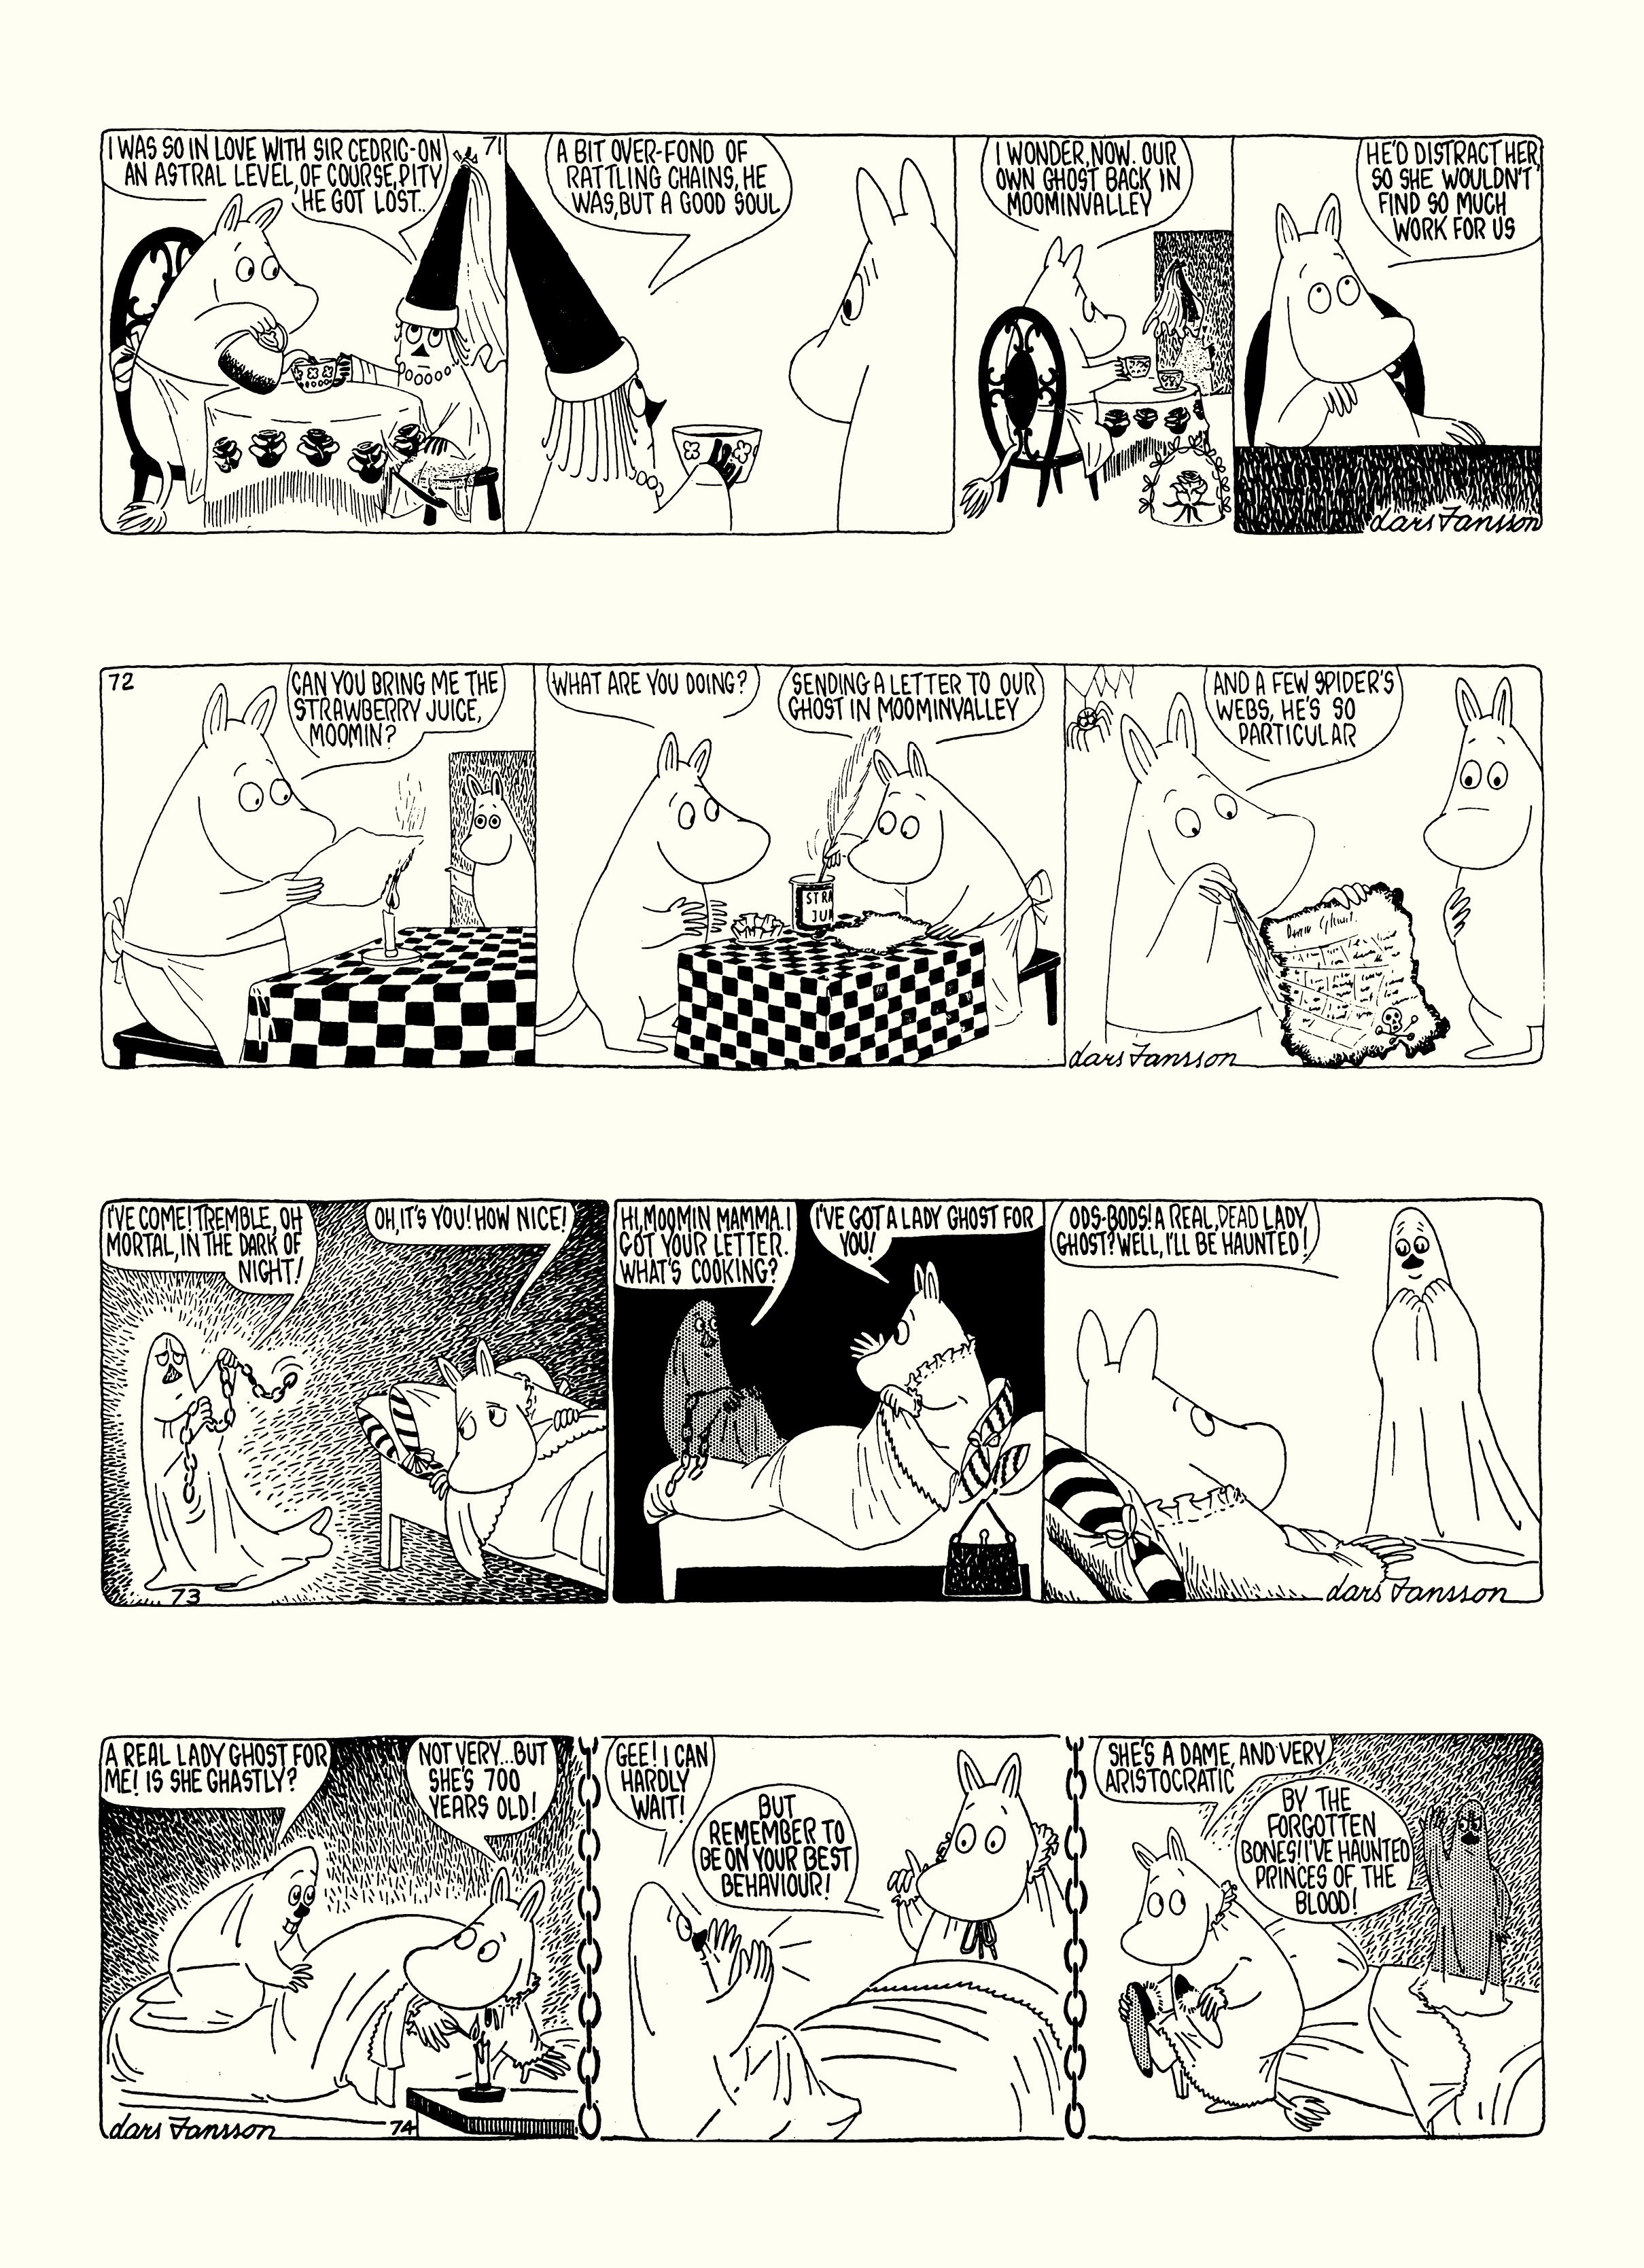 Read online Moomin: The Complete Lars Jansson Comic Strip comic -  Issue # TPB 7 - 66